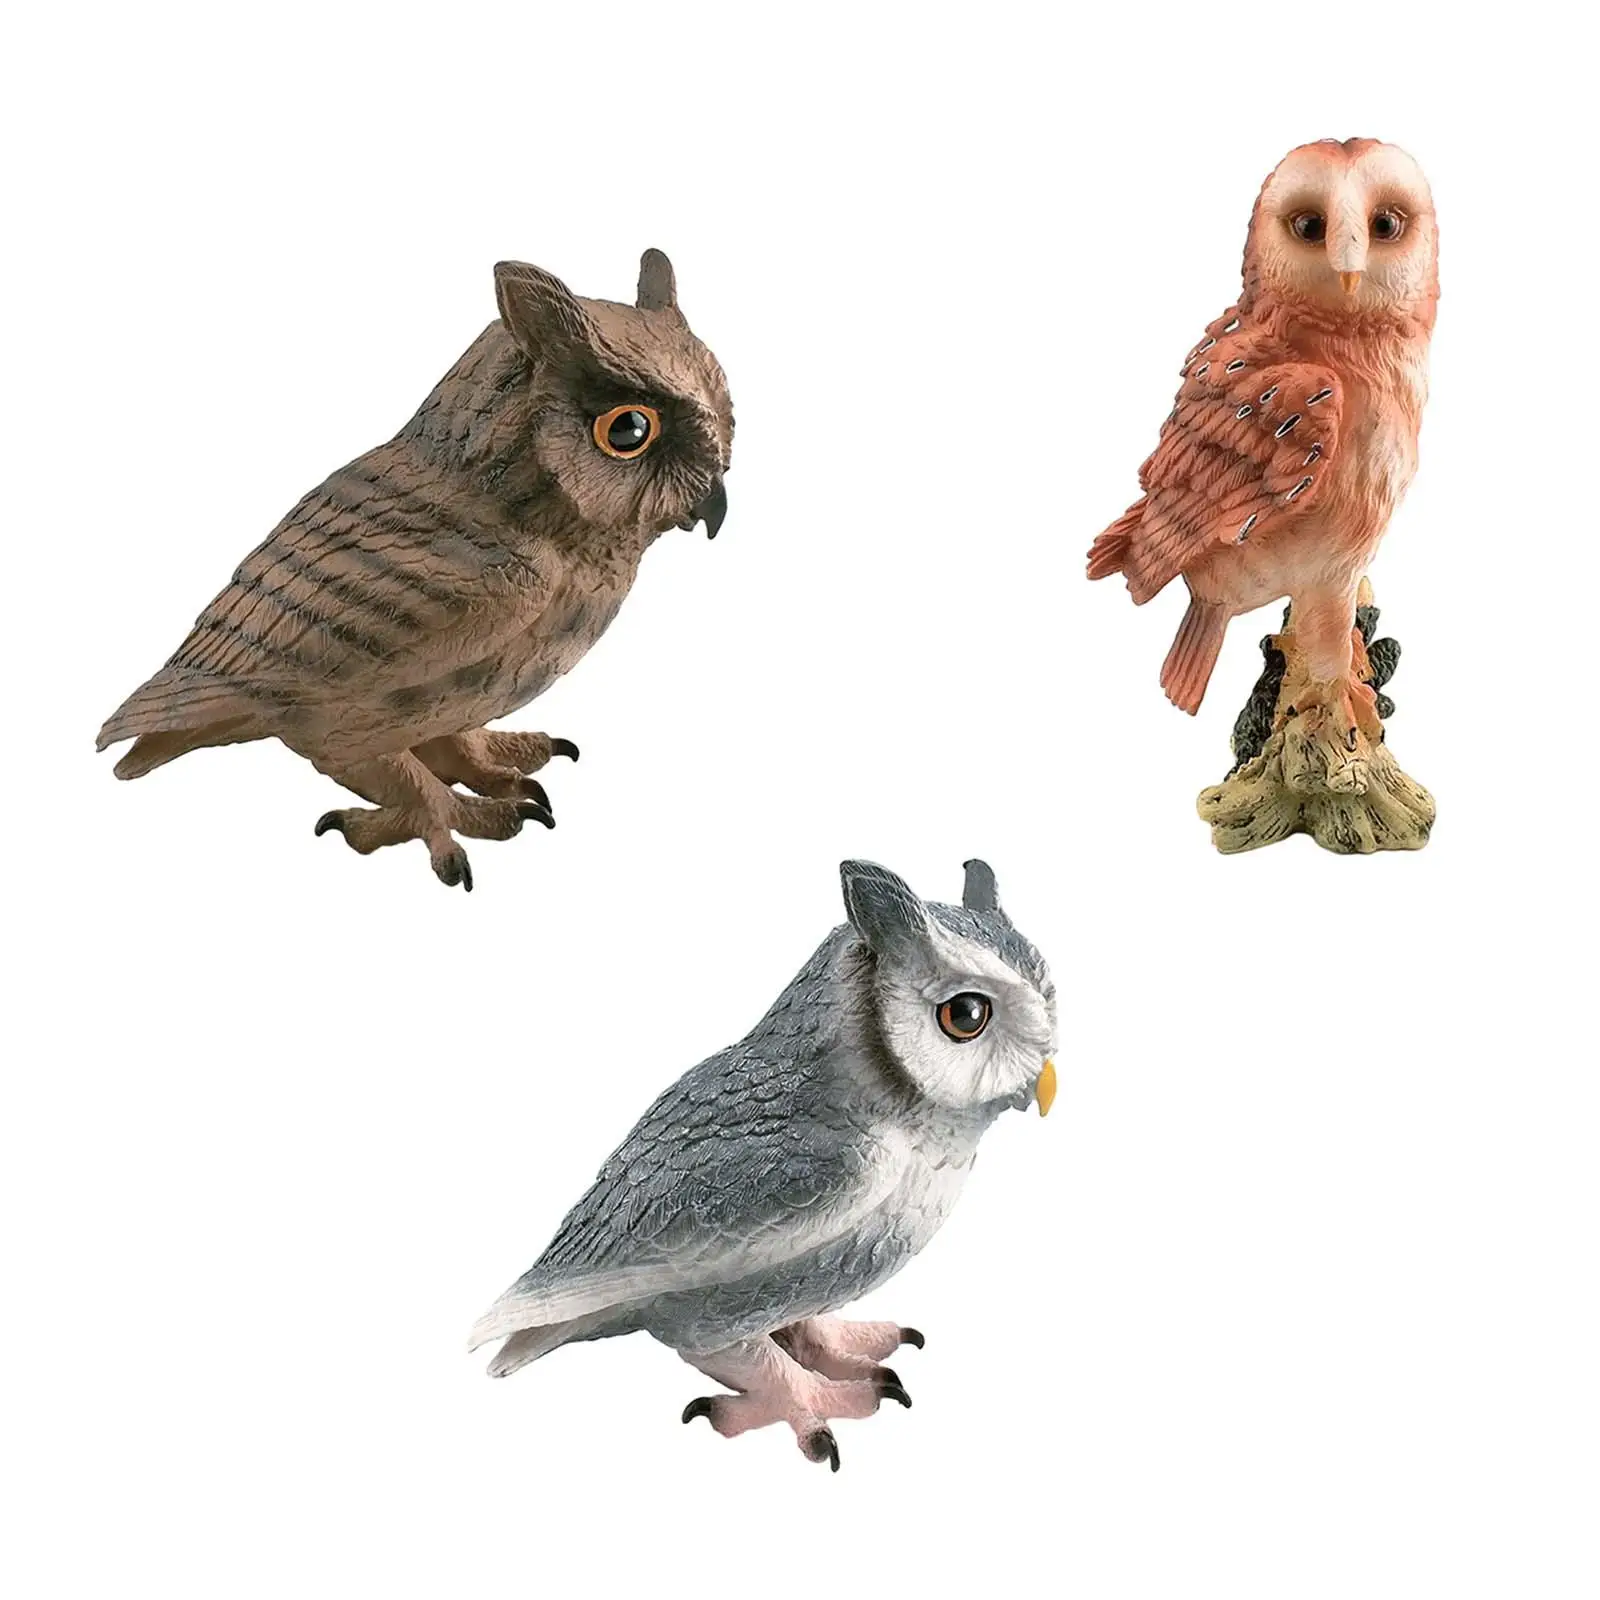 Simulation Owl Model Collection Playset Desktop Decor for Teaching Materials Decor Educational Birthday Gift Yard Decors